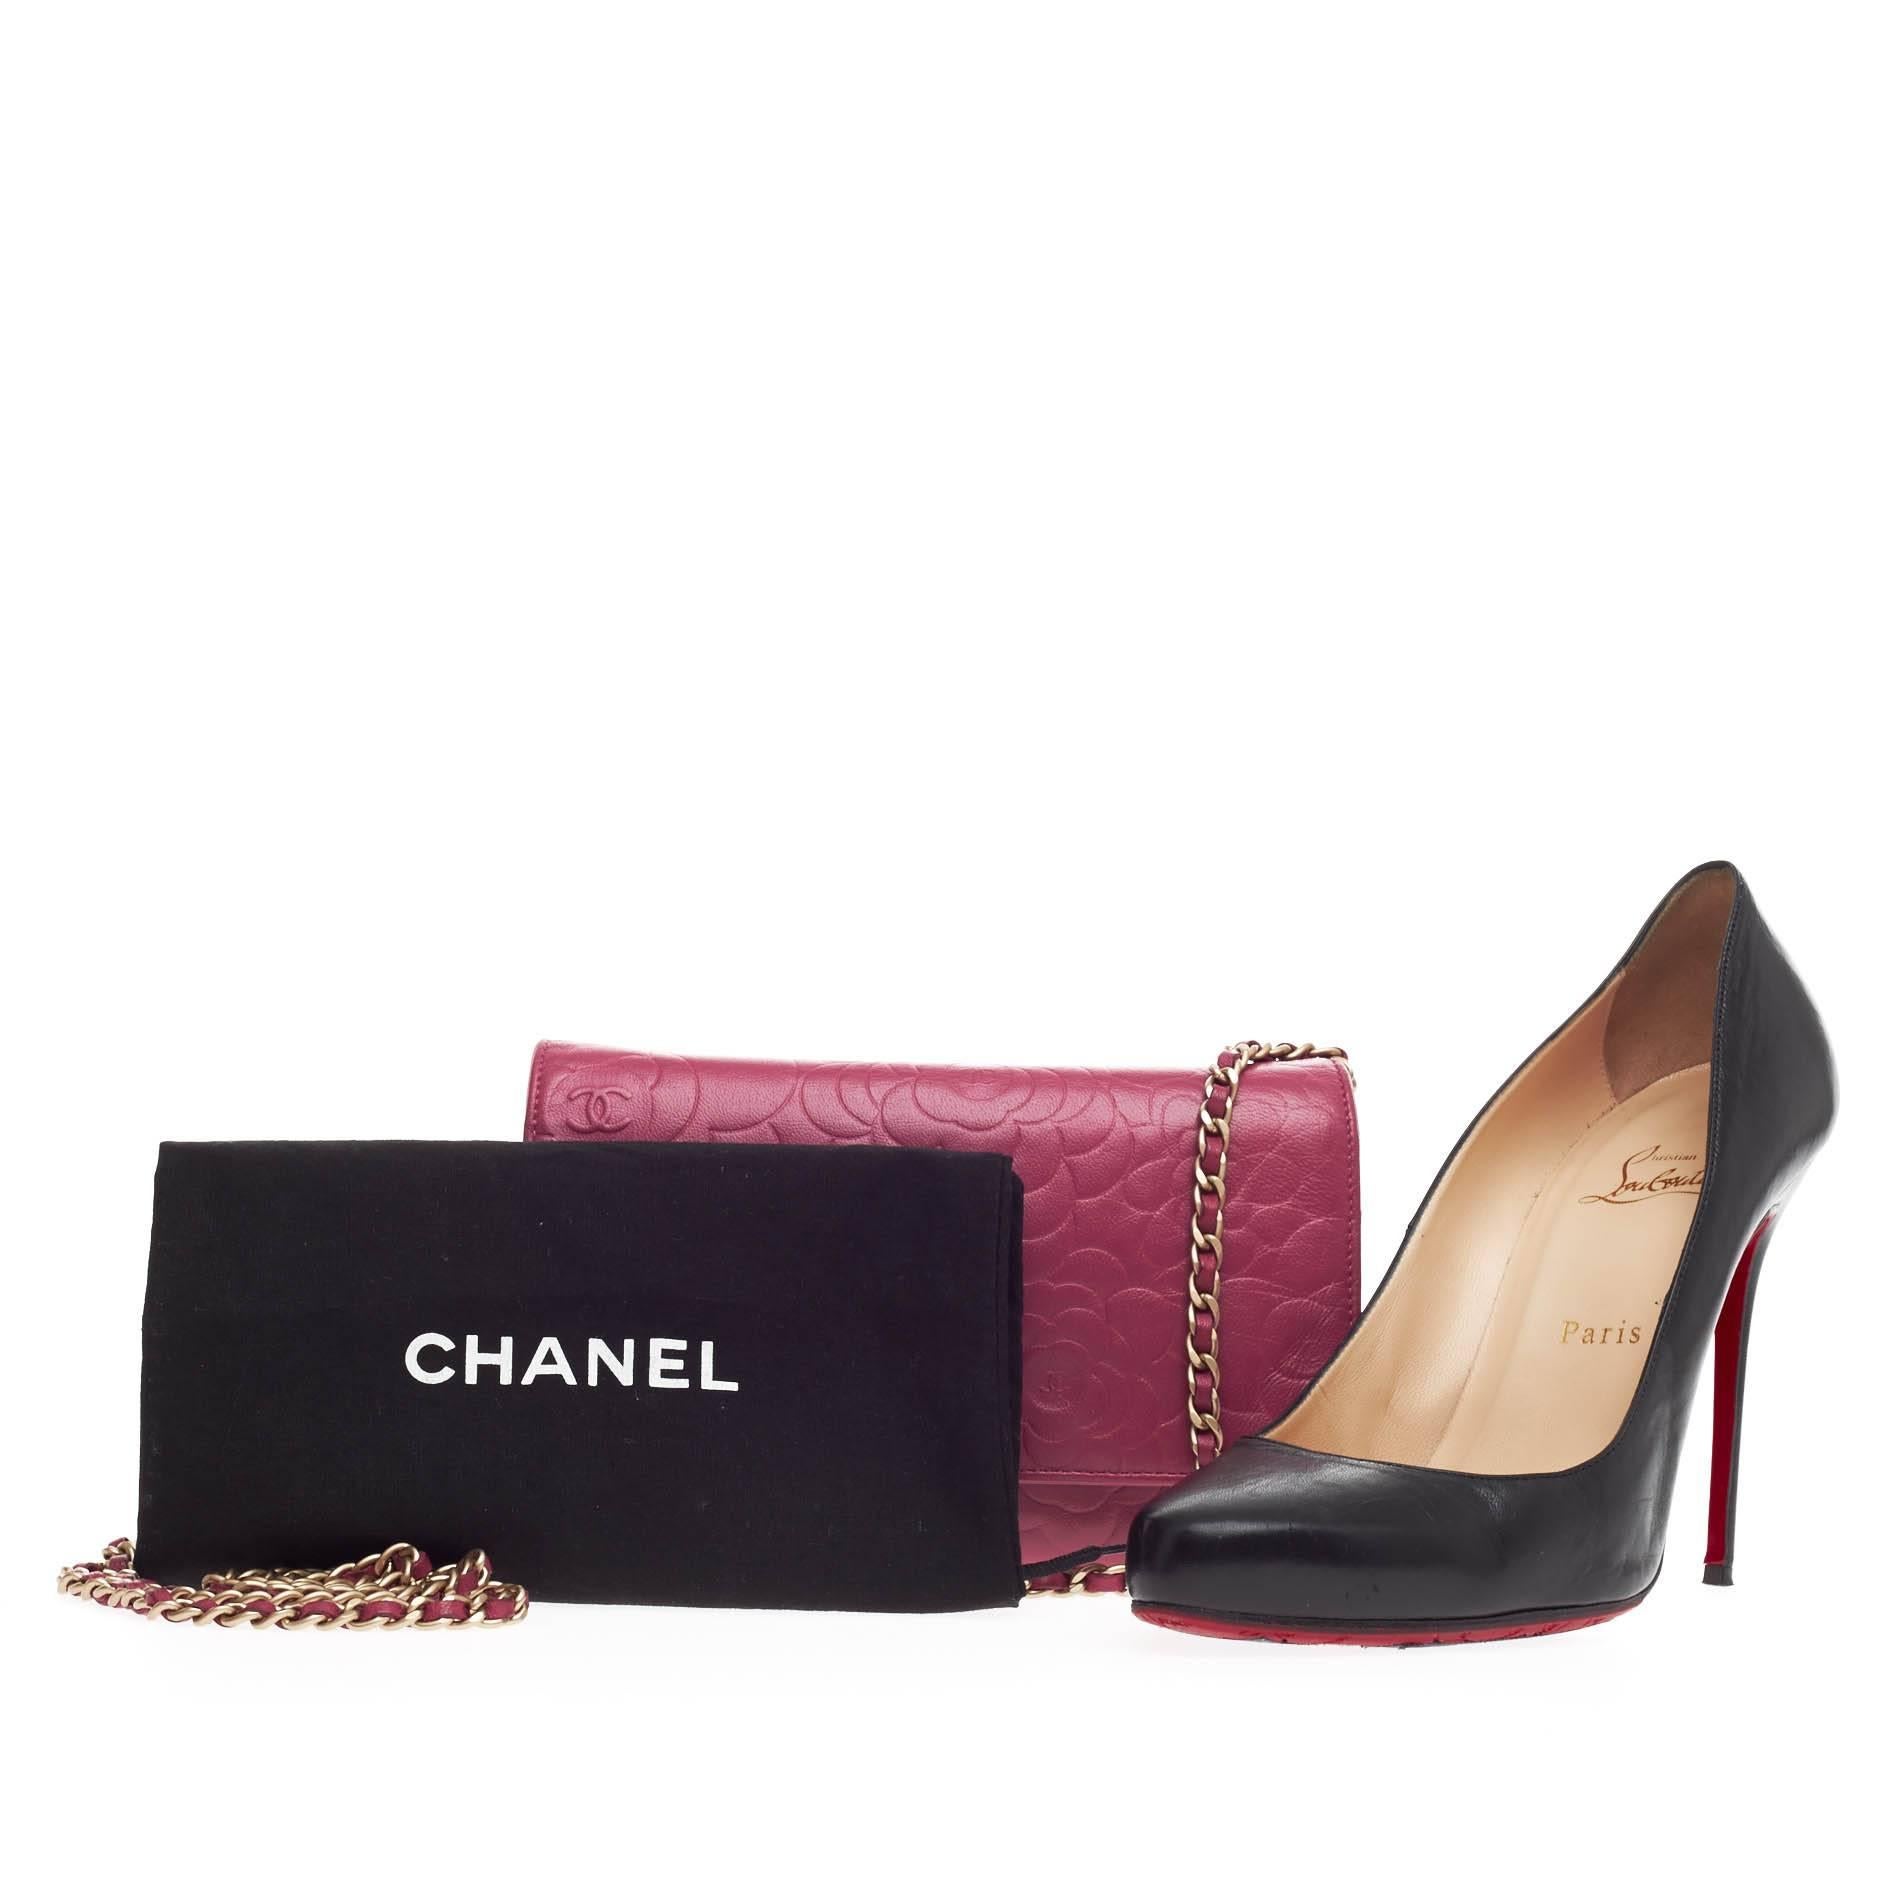 This authentic Chanel Wallet on Chain Camellia Lambskin showcases an effortlessly classic and feminine style perfect for on-the-go moments. Crafted in beautiful fuchsia lambskin leather with an abstract embossed camellia pattern, this petite chain